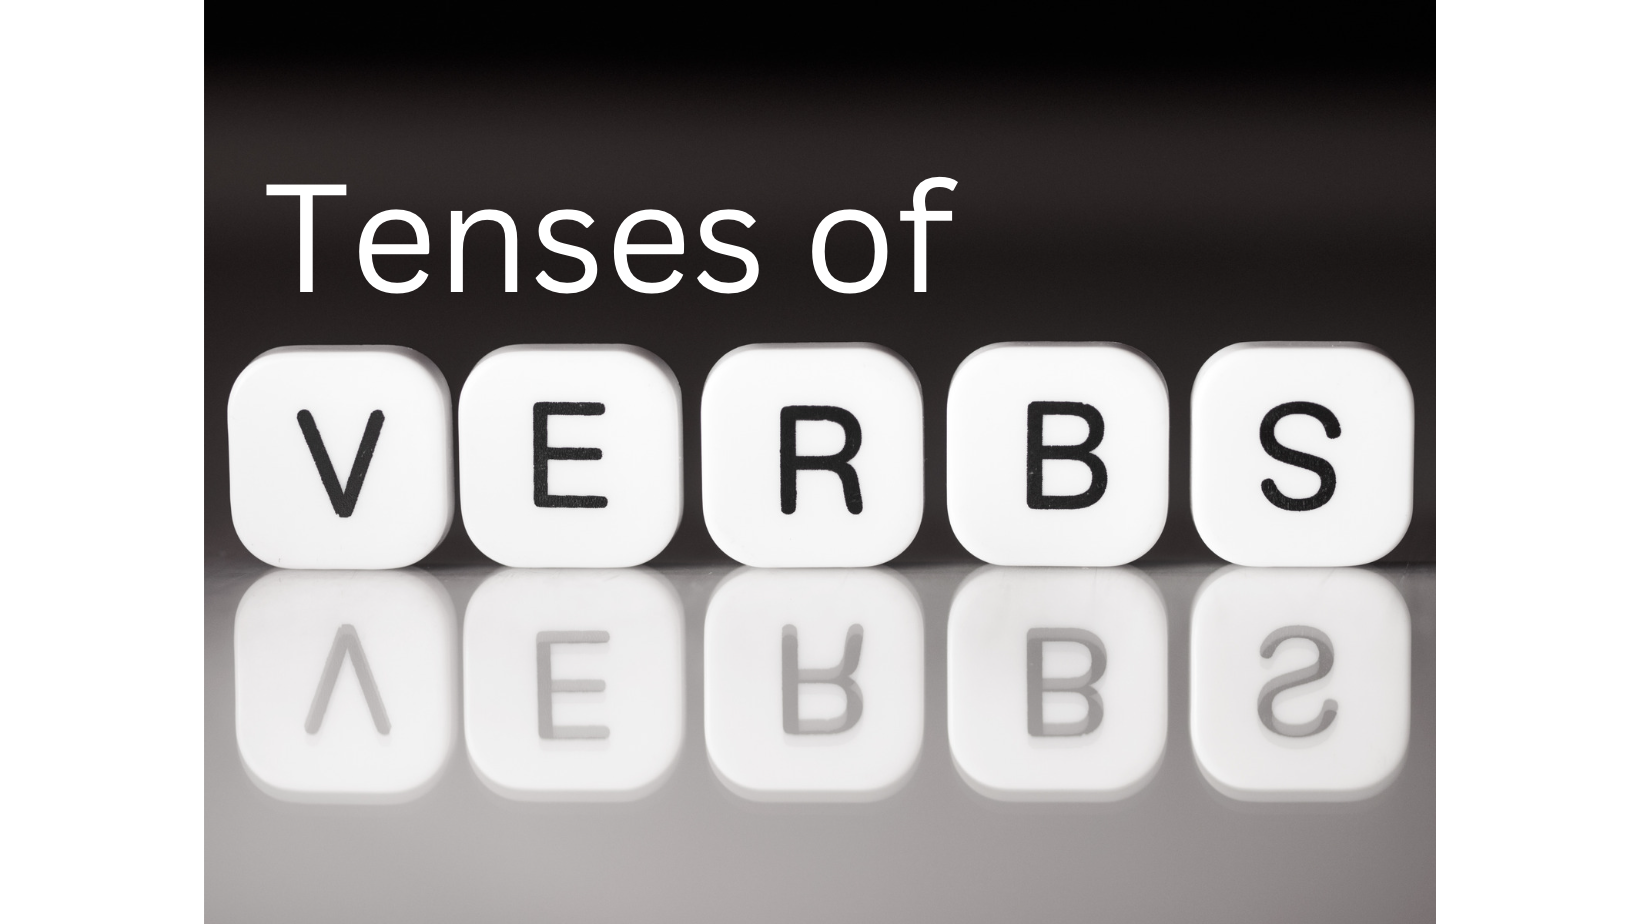 You are currently viewing Tenses of Verbs